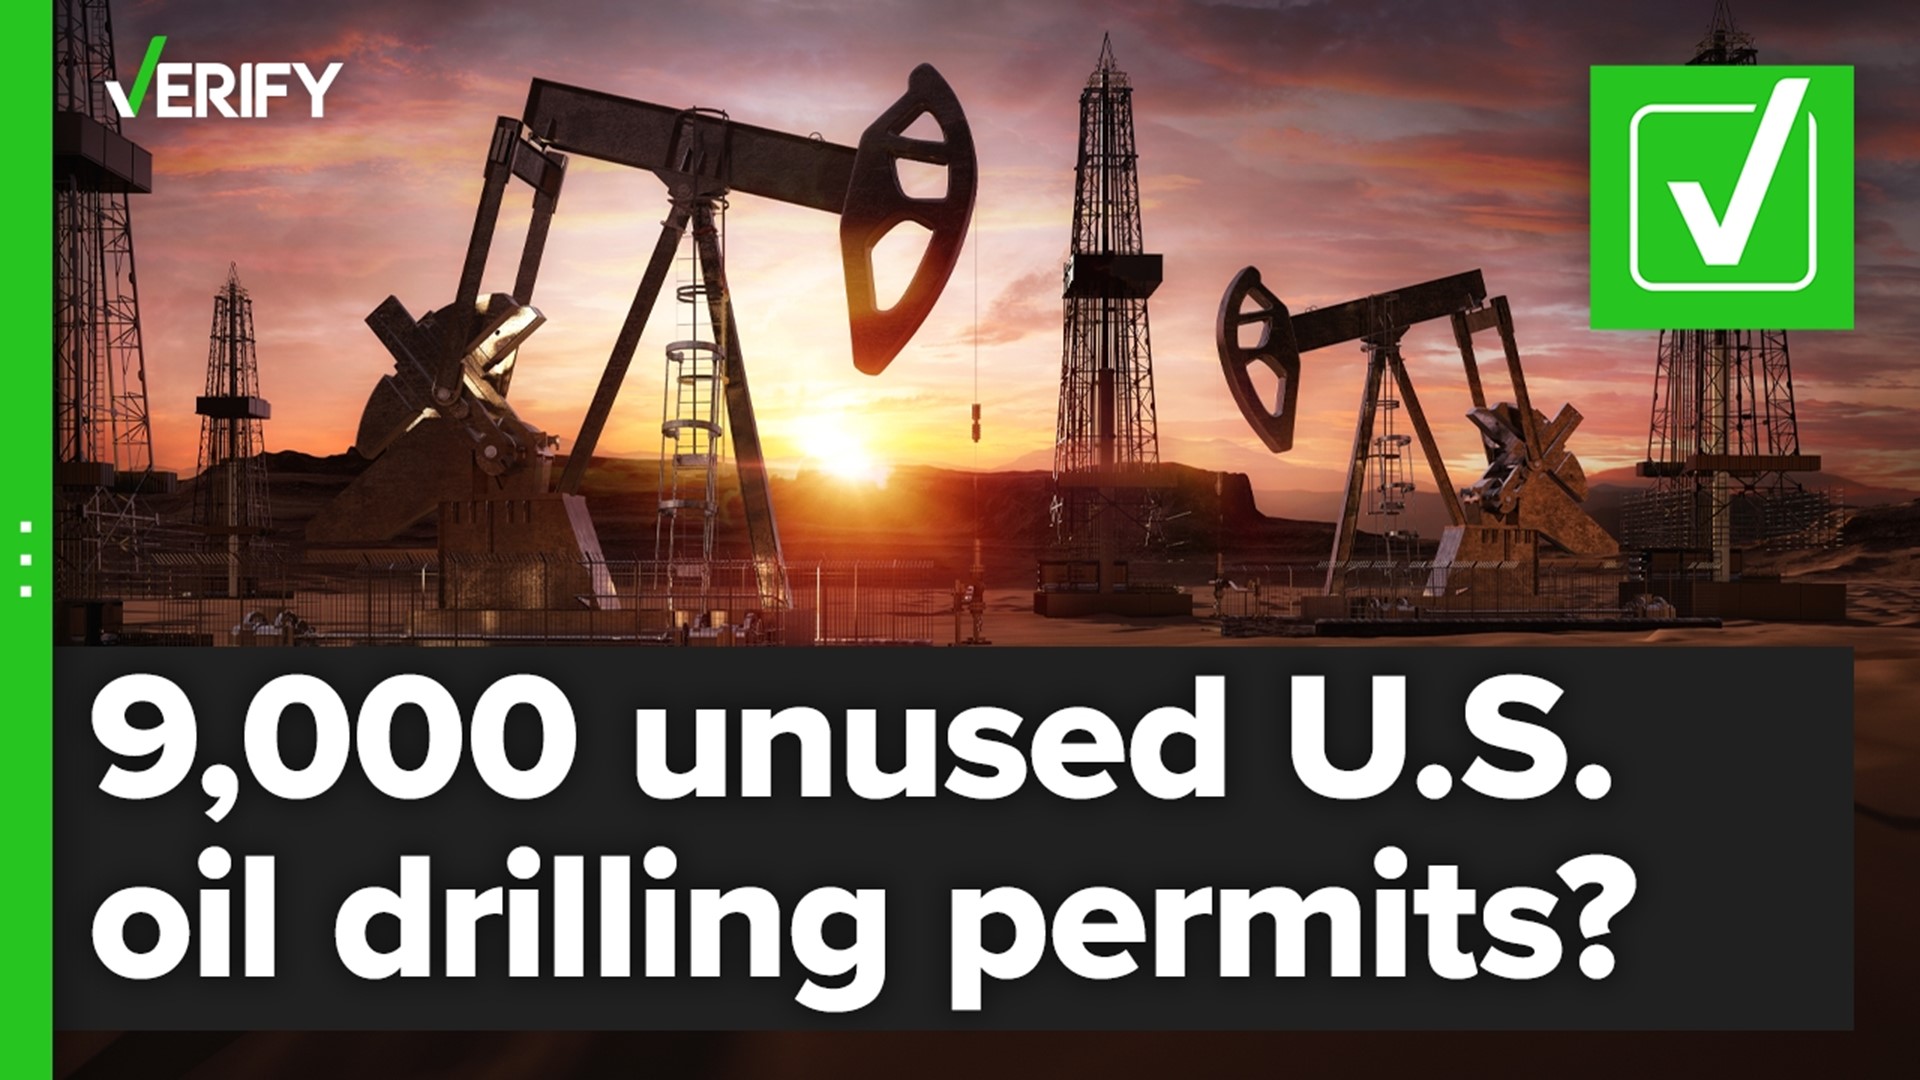 There are more than 9,000 permits to drill oil on federal lands, as President Biden claimed. But there are cost and logistical hurdles in the way.